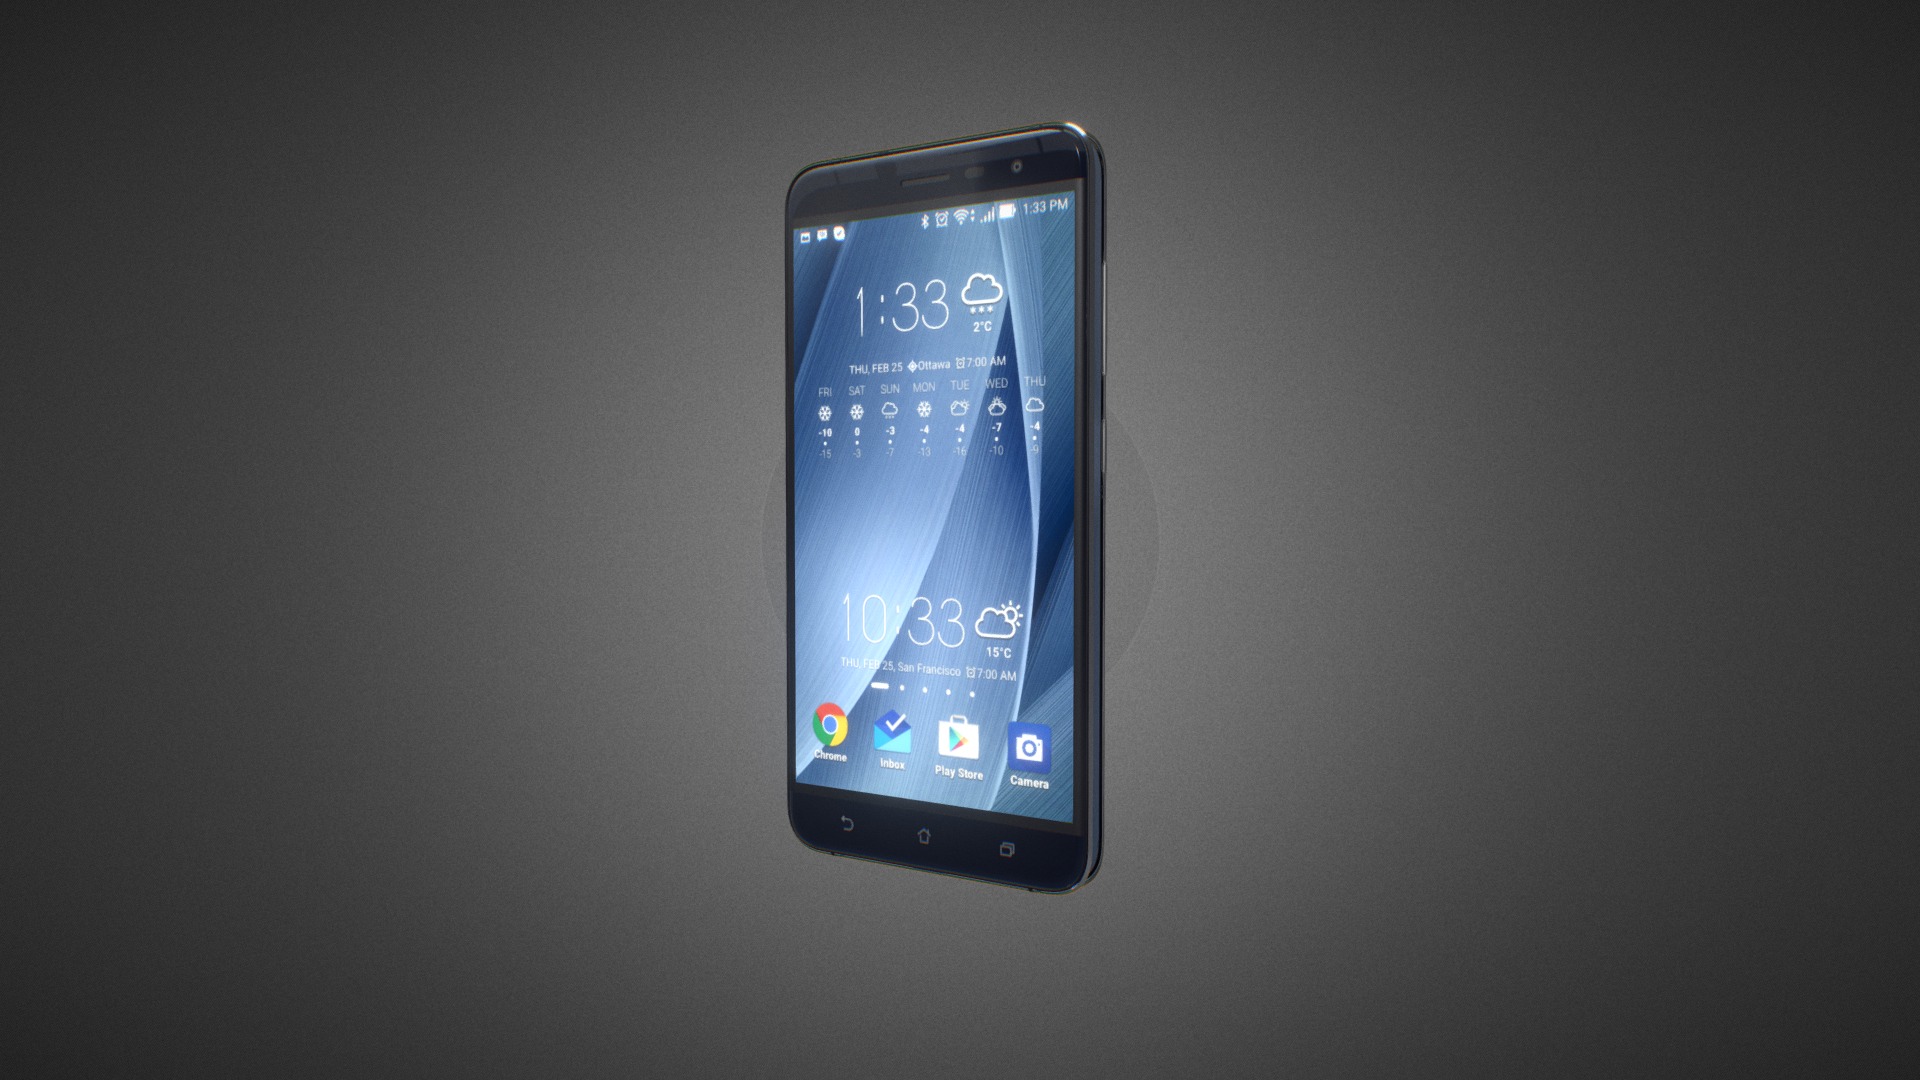 3D model Asus Zenfone 3 for Element 3D - This is a 3D model of the Asus Zenfone 3 for Element 3D. The 3D model is about a black smartphone with a blue screen.